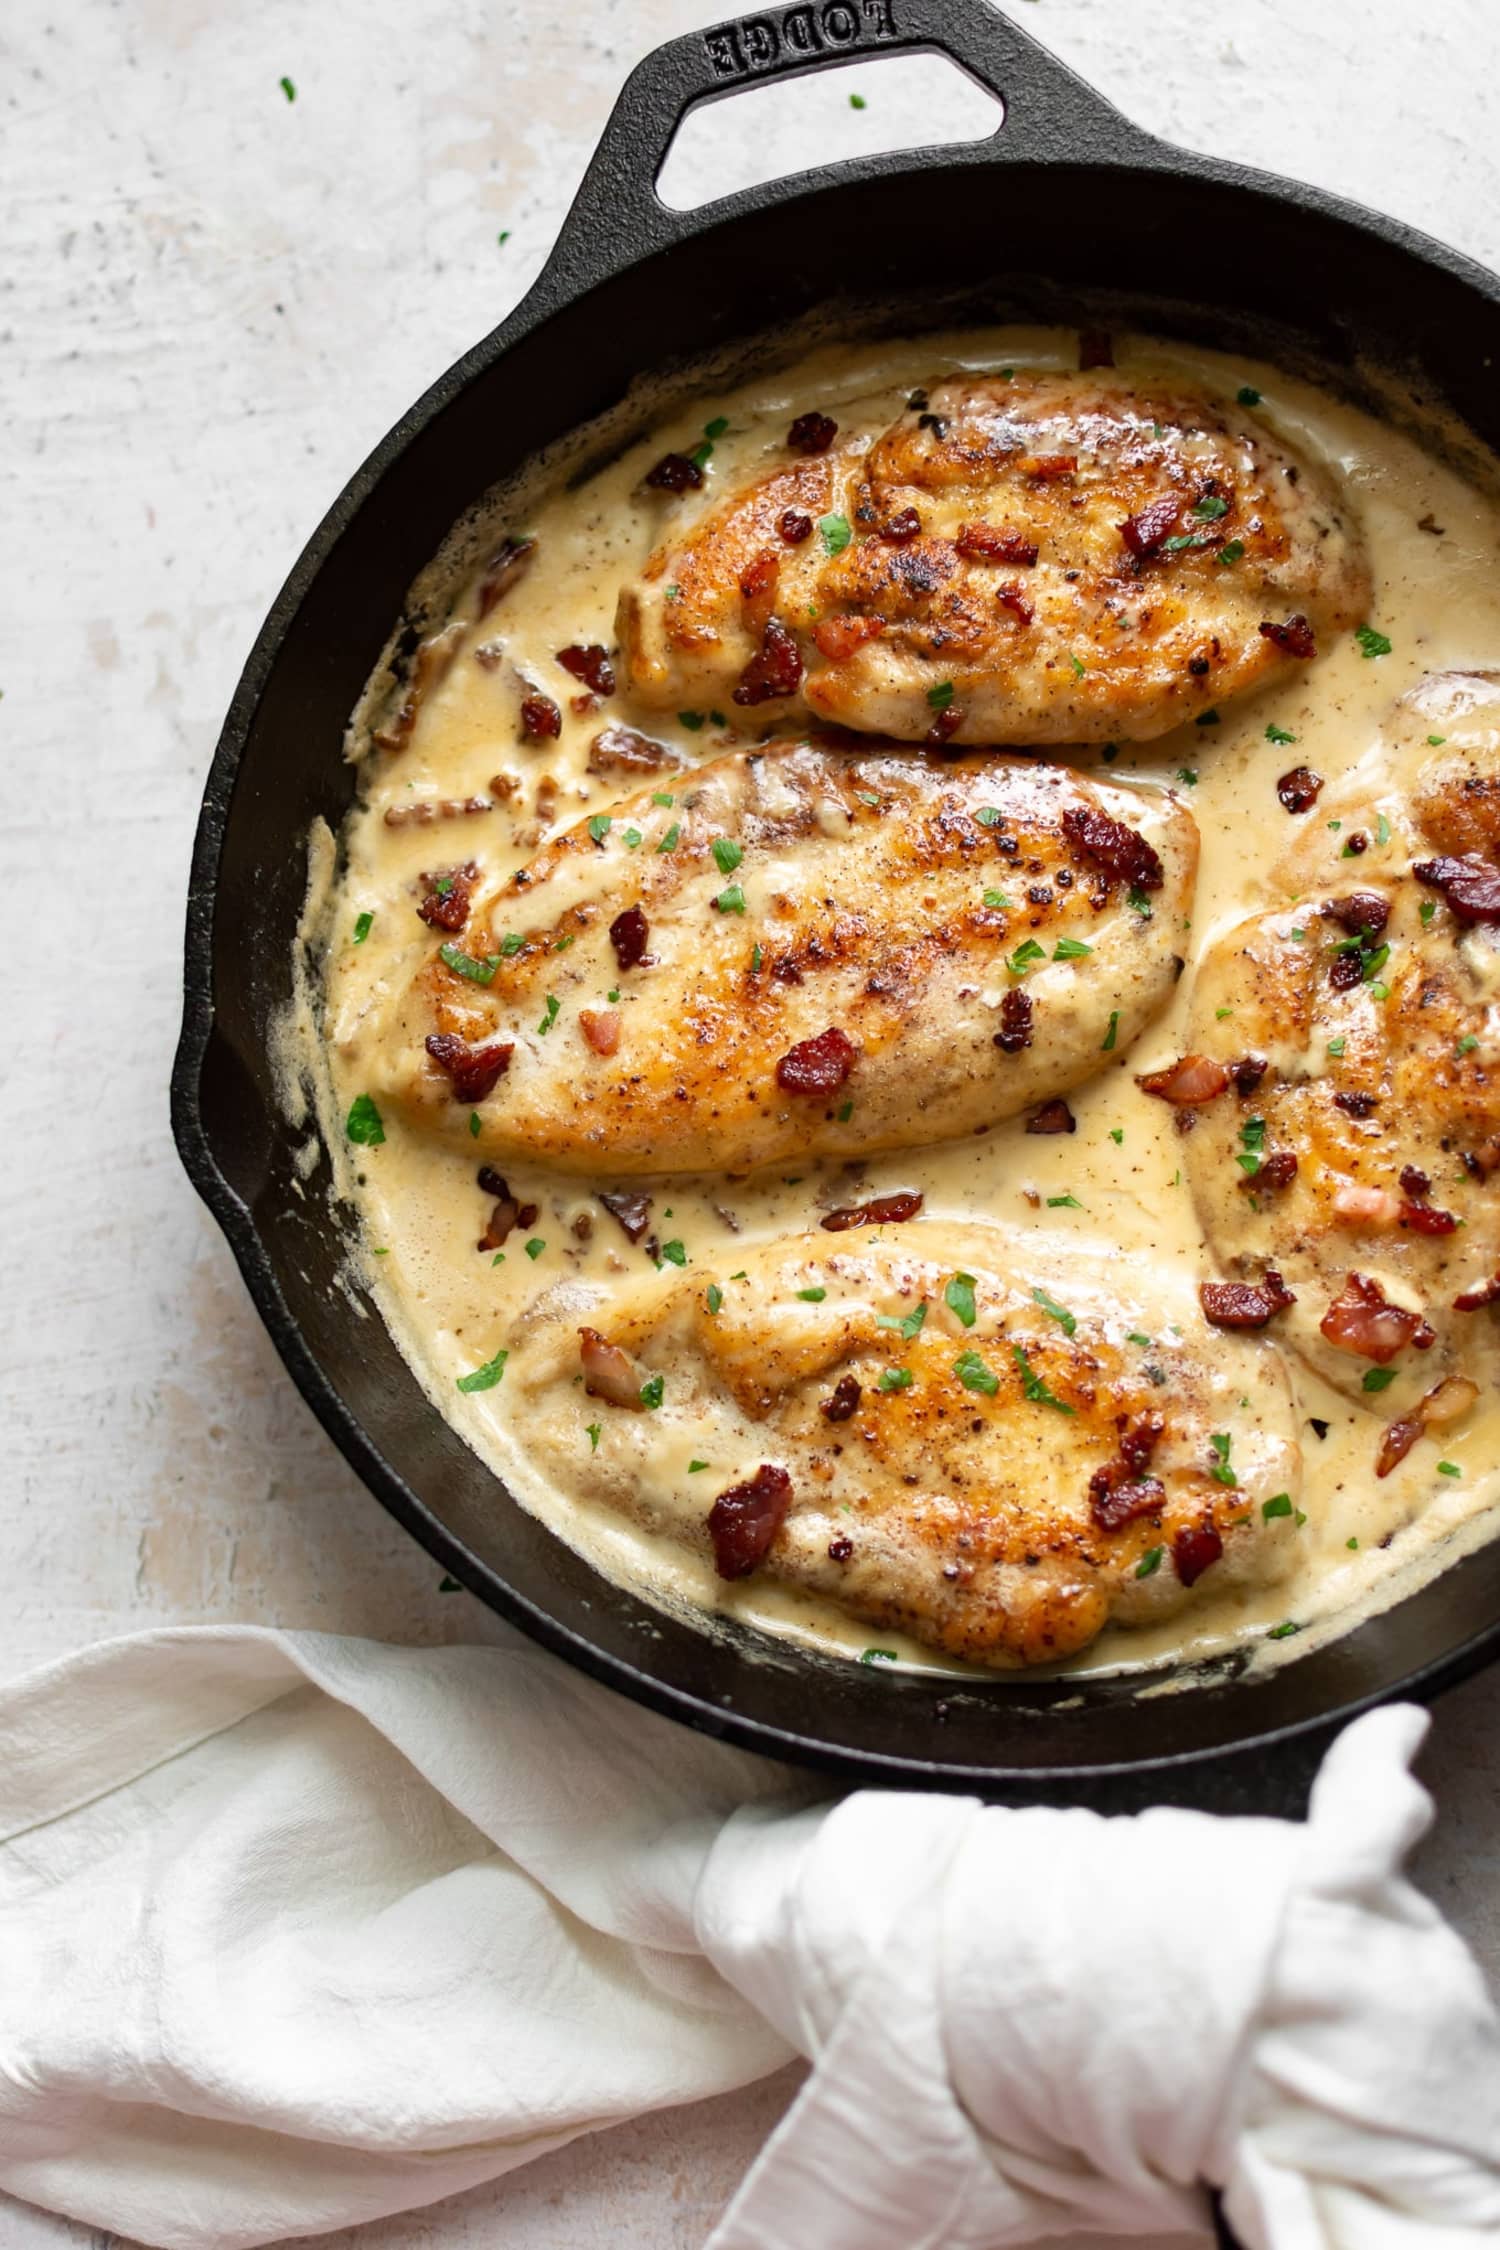 Creamy Bacon Chicken Is a Simple, Tasty Dinner